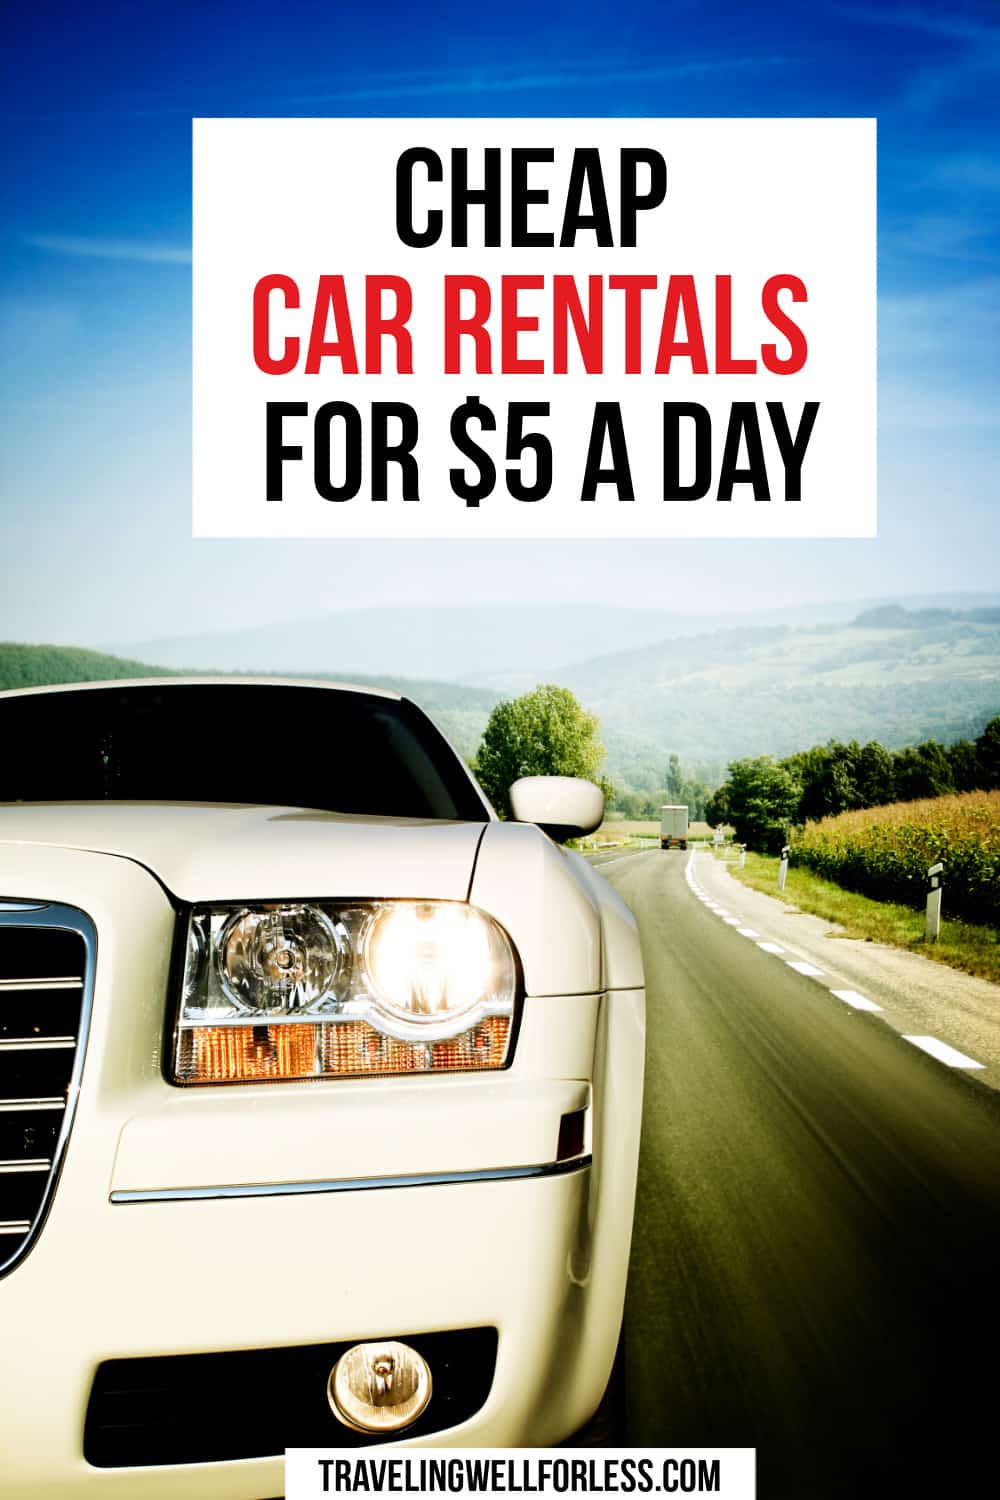 You can rent a car for less than $5 a day. bnok.vn